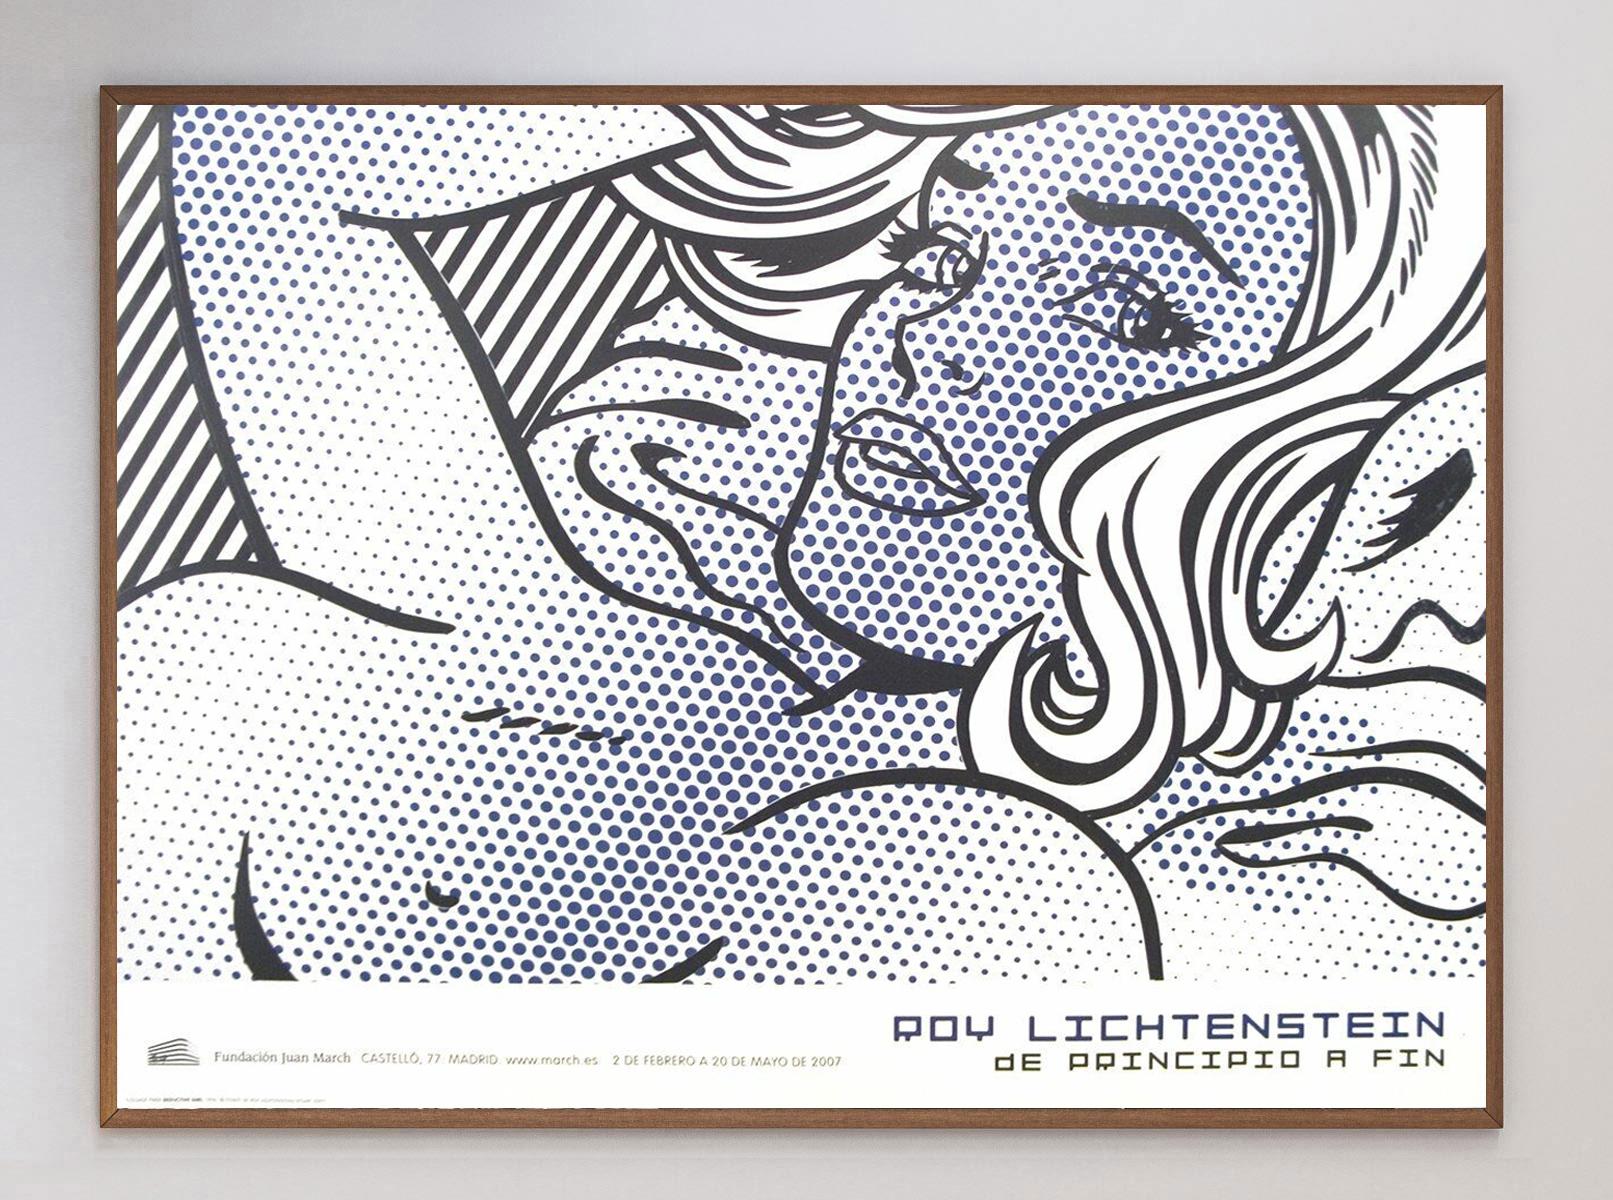 This stunning rare design was created for the Fundacion Juan March in Madrid, Spain in promotion of the Roy Lichtenstein retrospective exhibition 